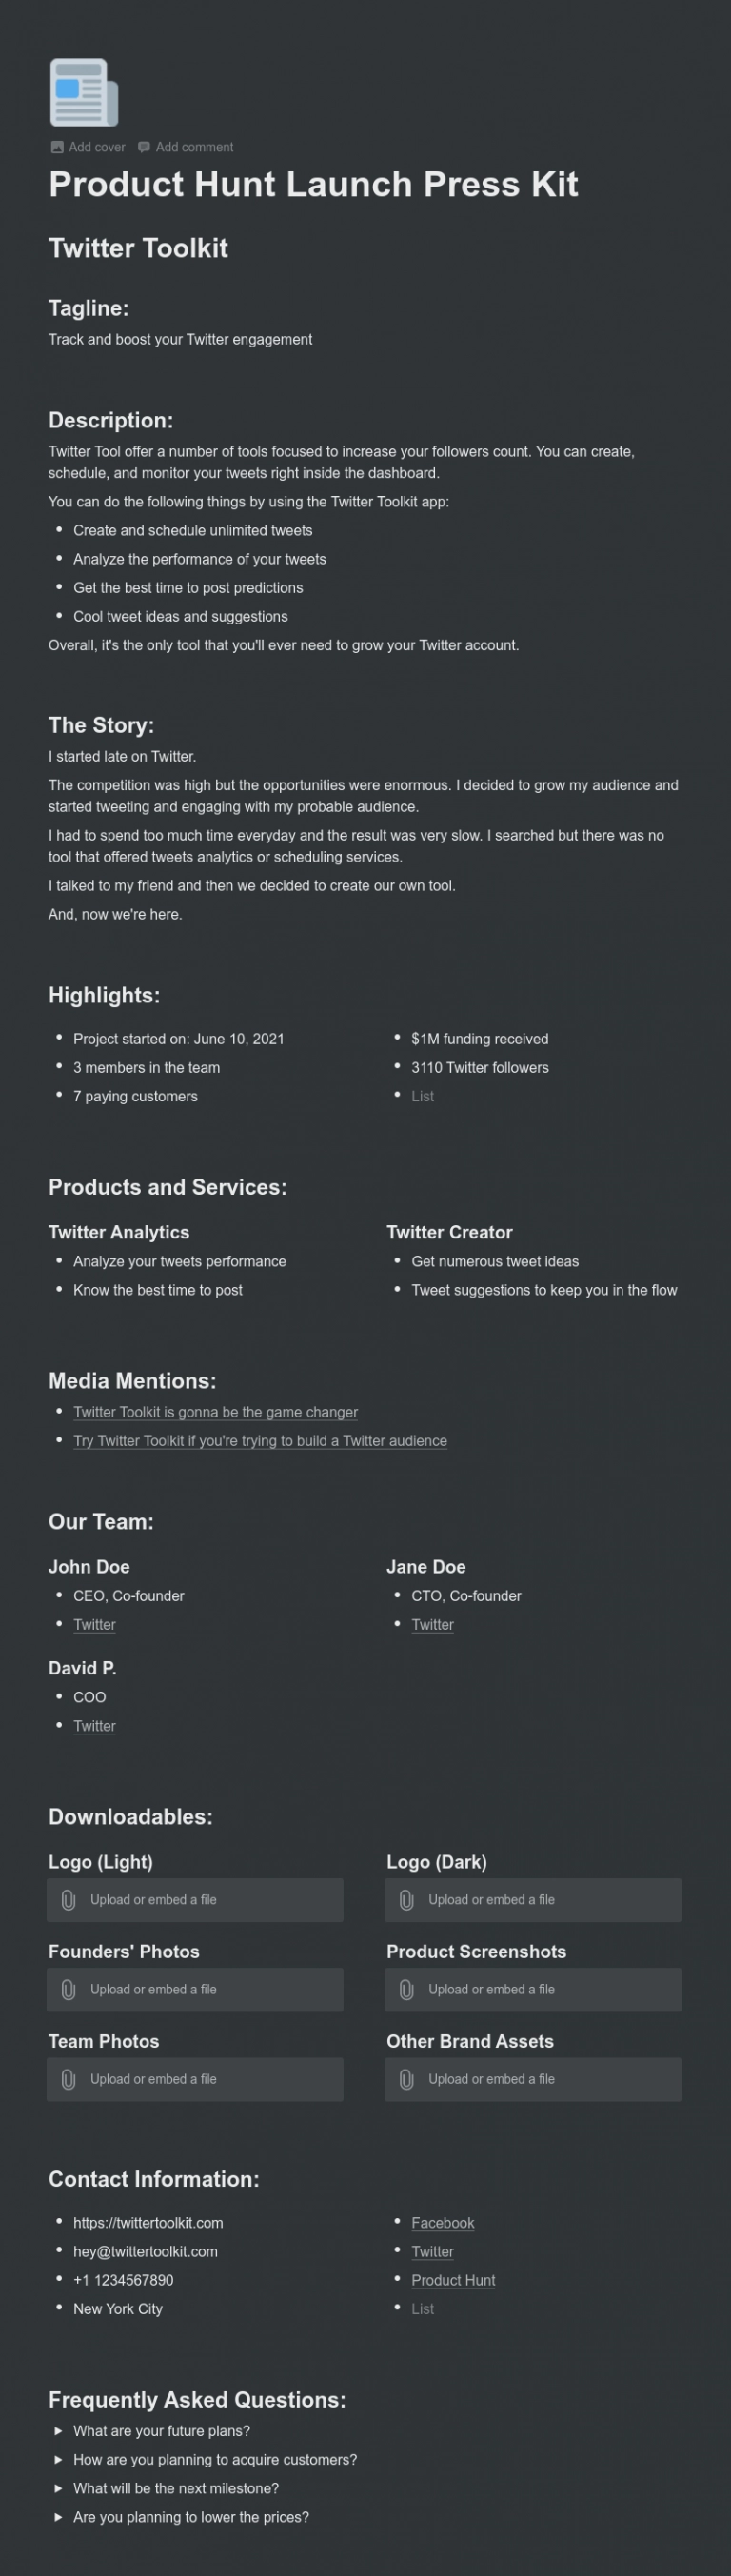 Notion Product Hunt Launch Press Kit